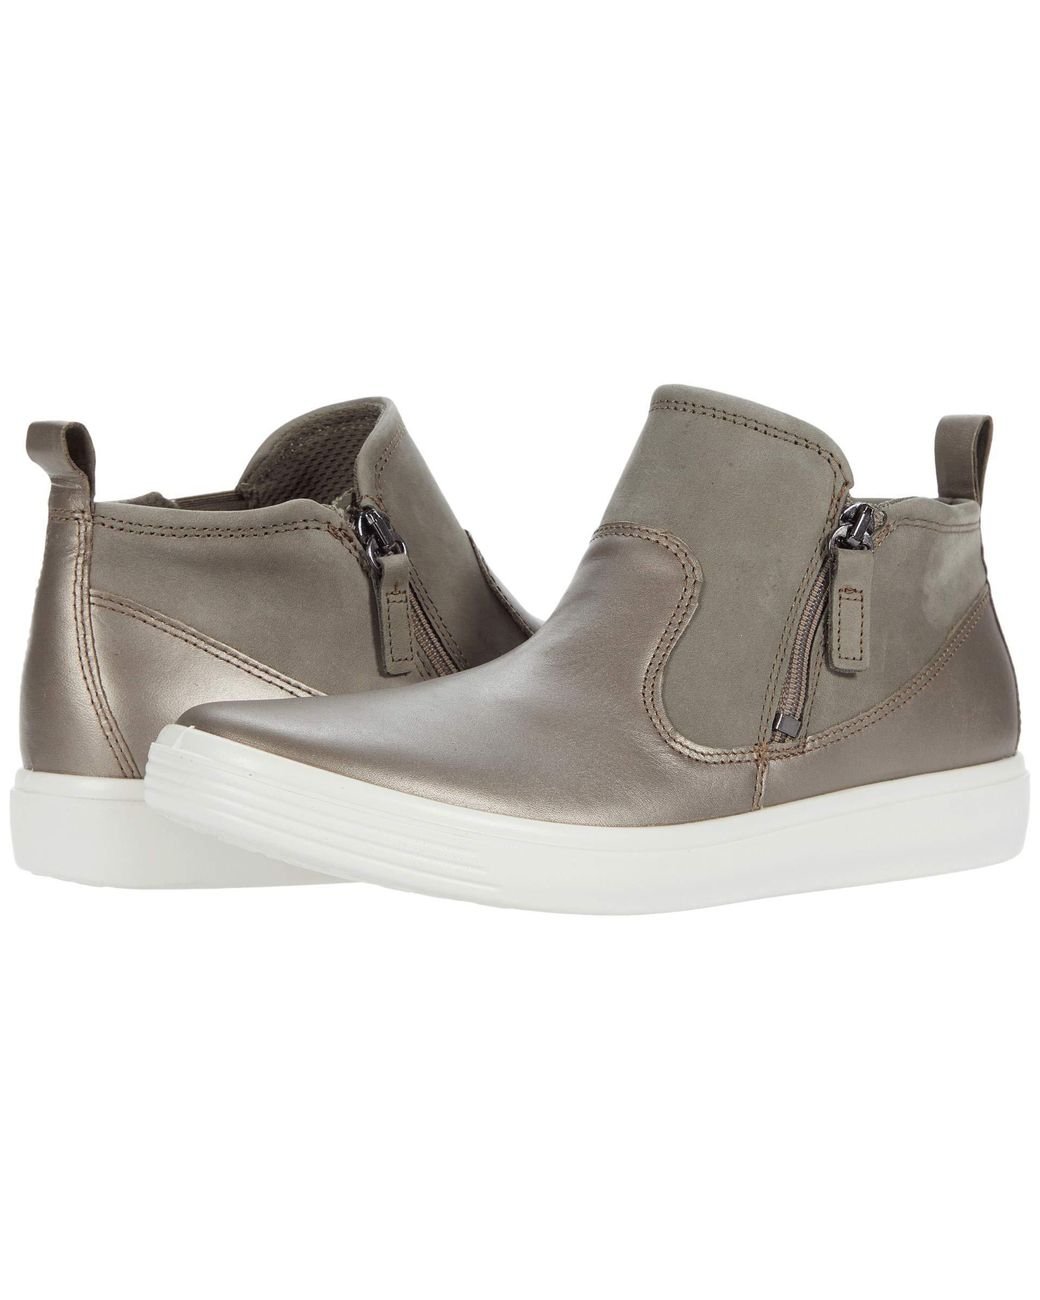 Ecco Leather Soft Classic Bootie Sneaker in Gray - Save 40% - Lyst